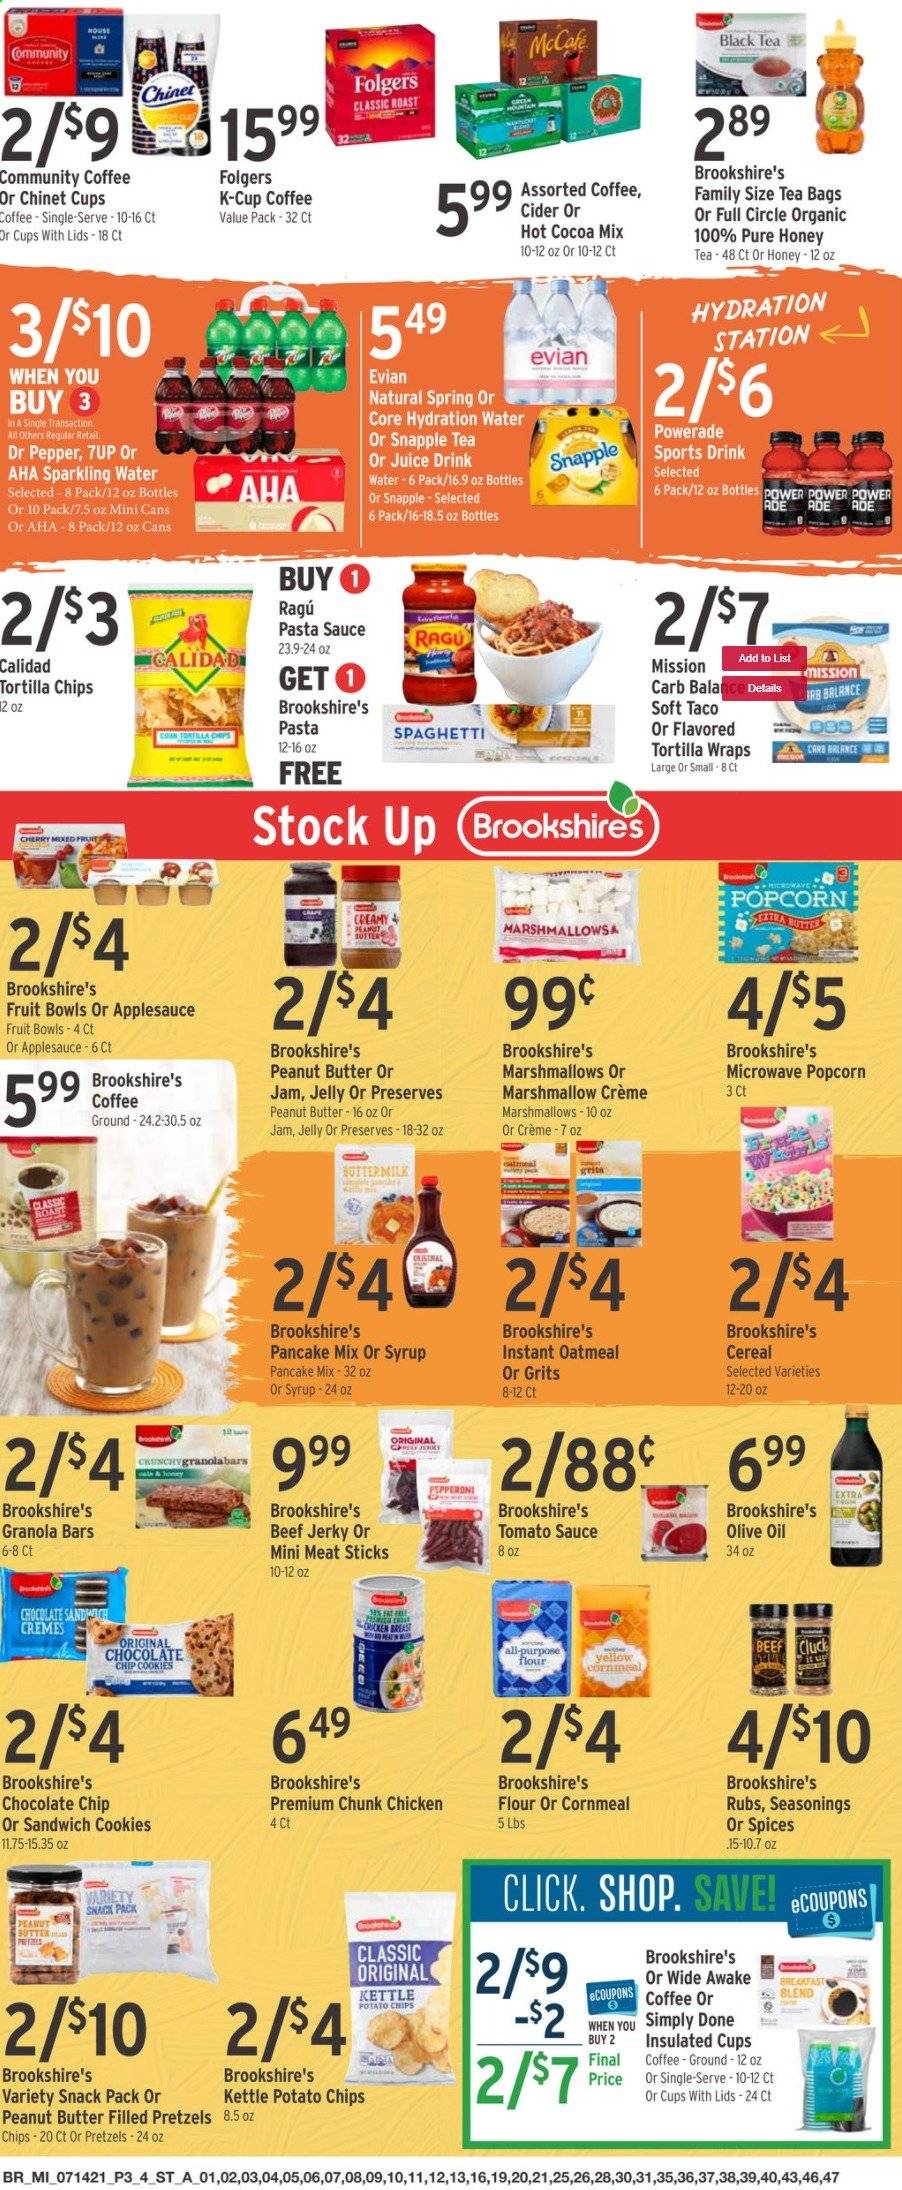 thumbnail - Brookshires Flyer - 07/14/2021 - 07/20/2021 - Sales products - pretzels, wraps, cherries, spaghetti, pasta sauce, sandwich, sauce, pancakes, ragú pasta, beef jerky, jerky, pepperoni, buttermilk, cookies, sandwich cookies, jelly, tortilla chips, potato chips, chips, popcorn, oatmeal, grits, tomato sauce, cereals, granola bar, ragu, olive oil, oil, apple sauce, fruit jam, peanut butter, Powerade, juice, Dr. Pepper, 7UP, Snapple, sparkling water, Evian, hot cocoa, tea bags, coffee, Folgers, coffee capsules, McCafe, K-Cups, cider. Page 3.